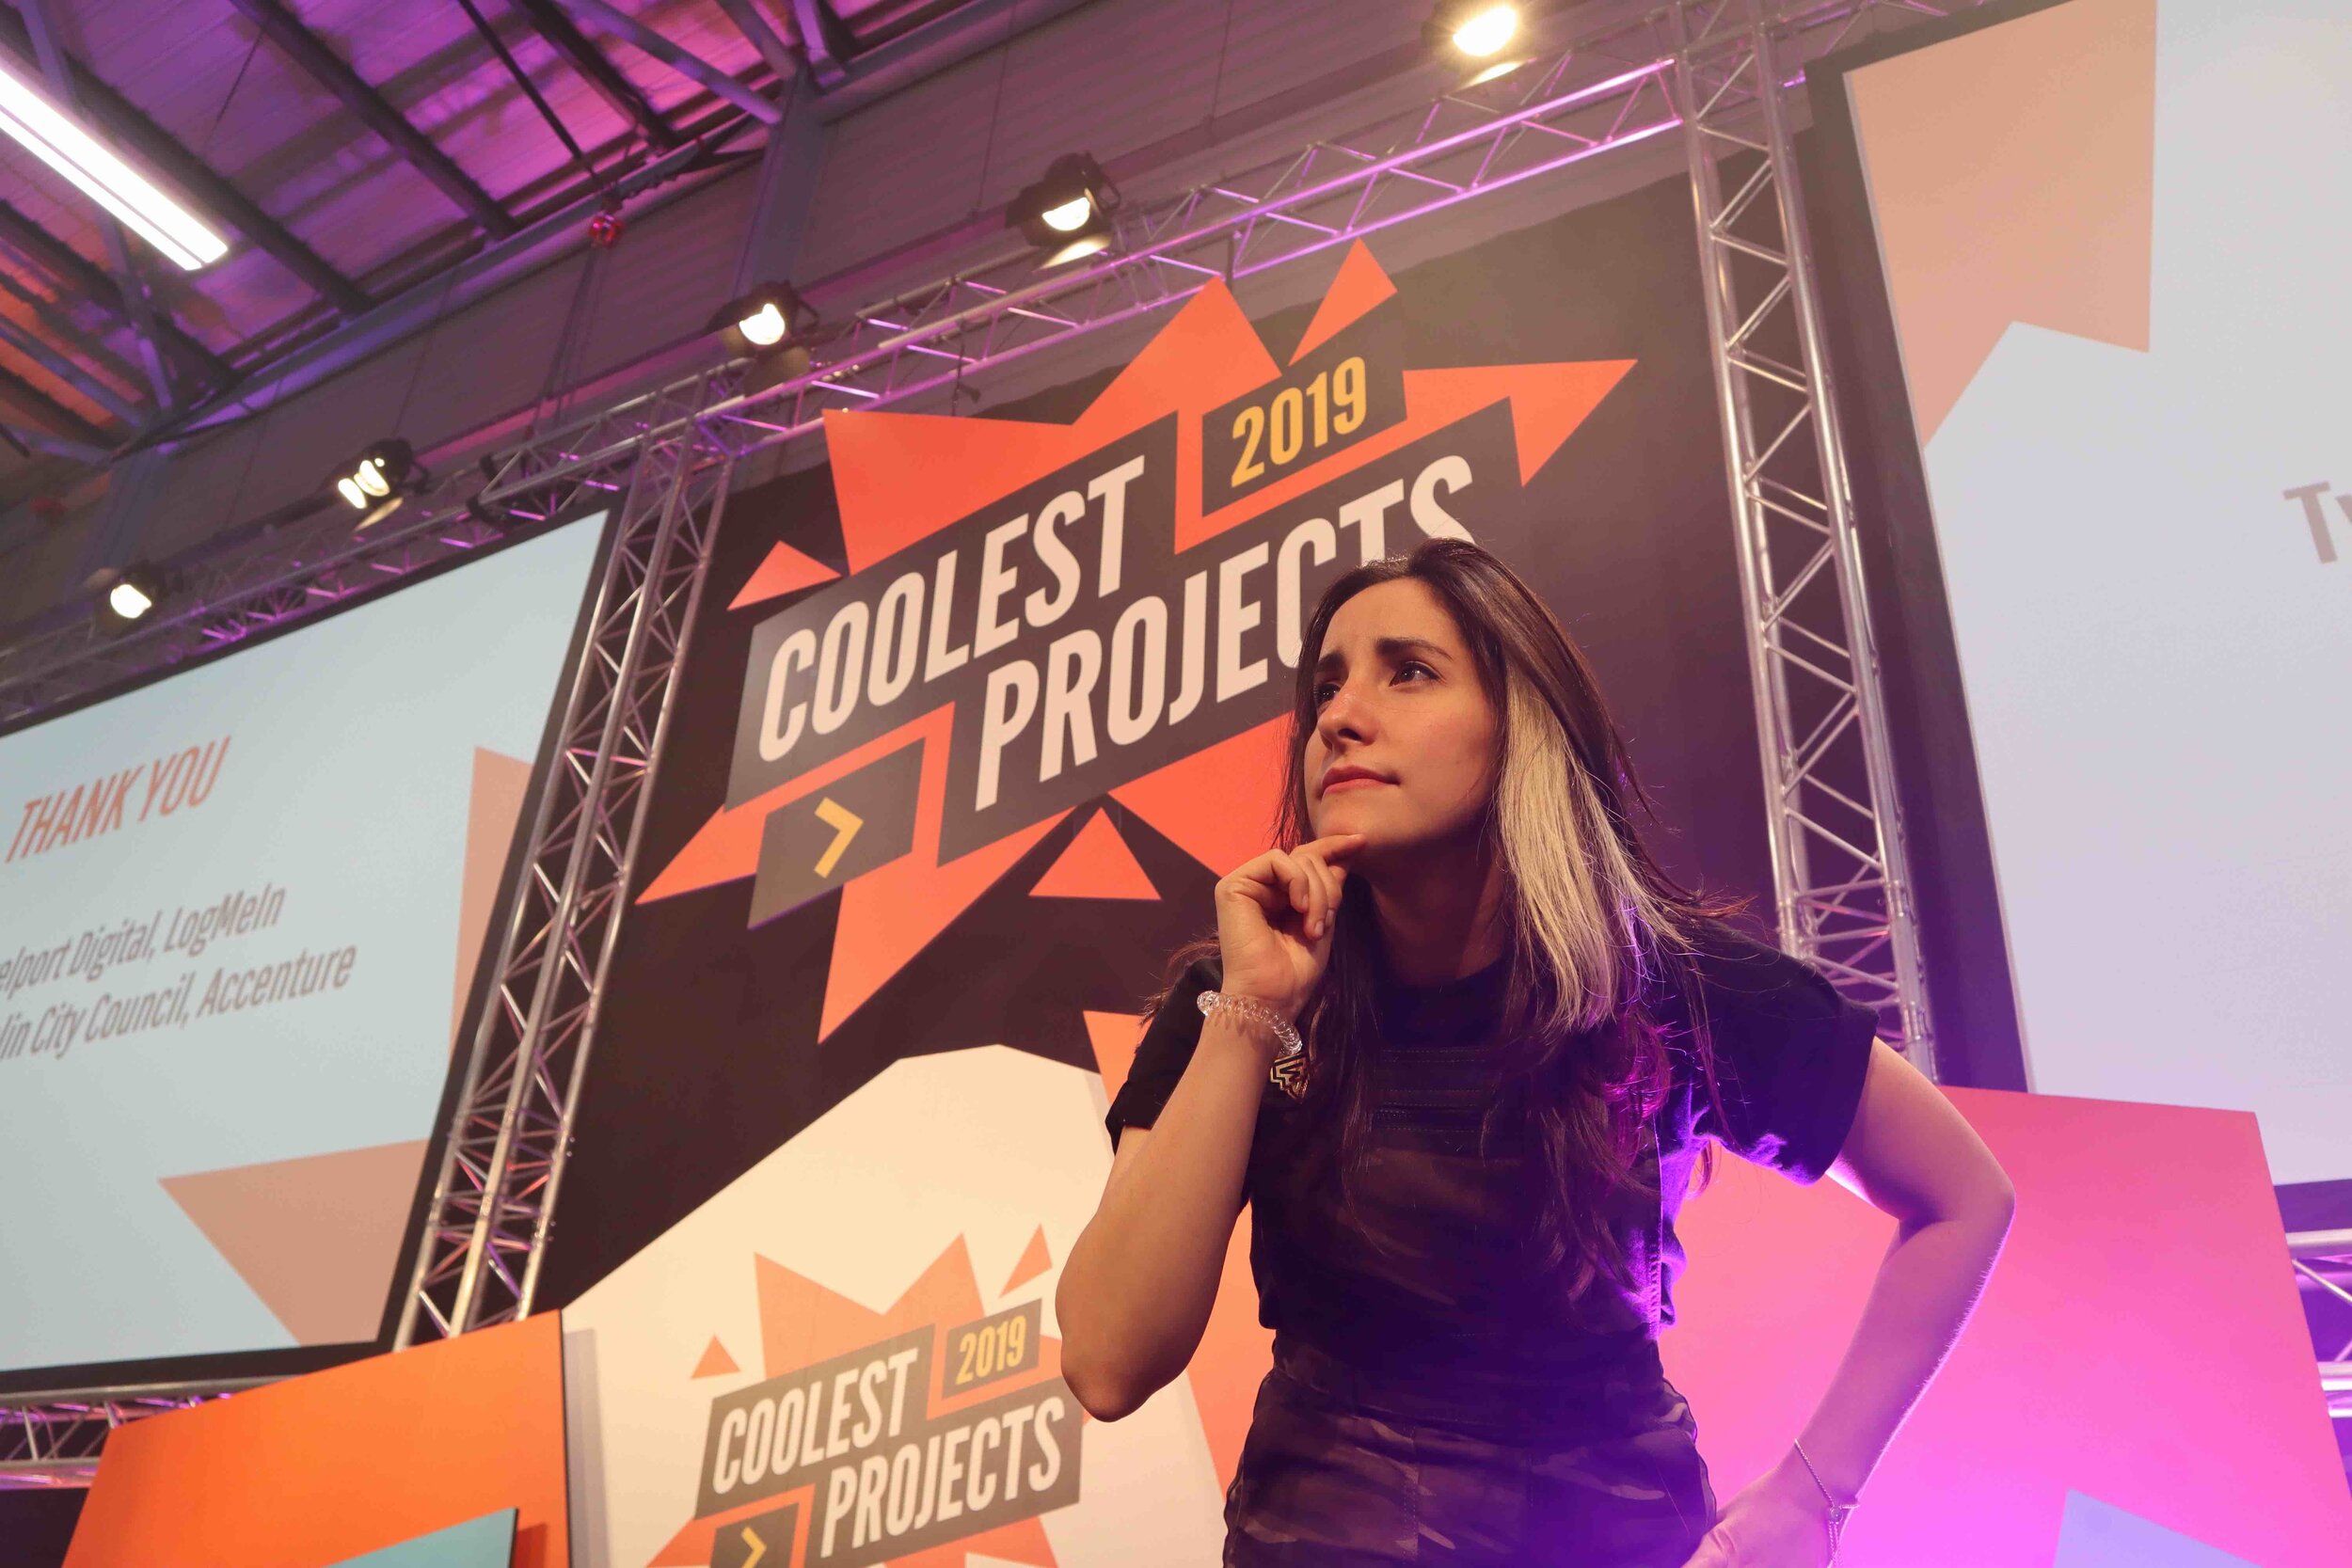 Estefannie after her key note at Coolest Projects - Dublin, Ireland May 2019